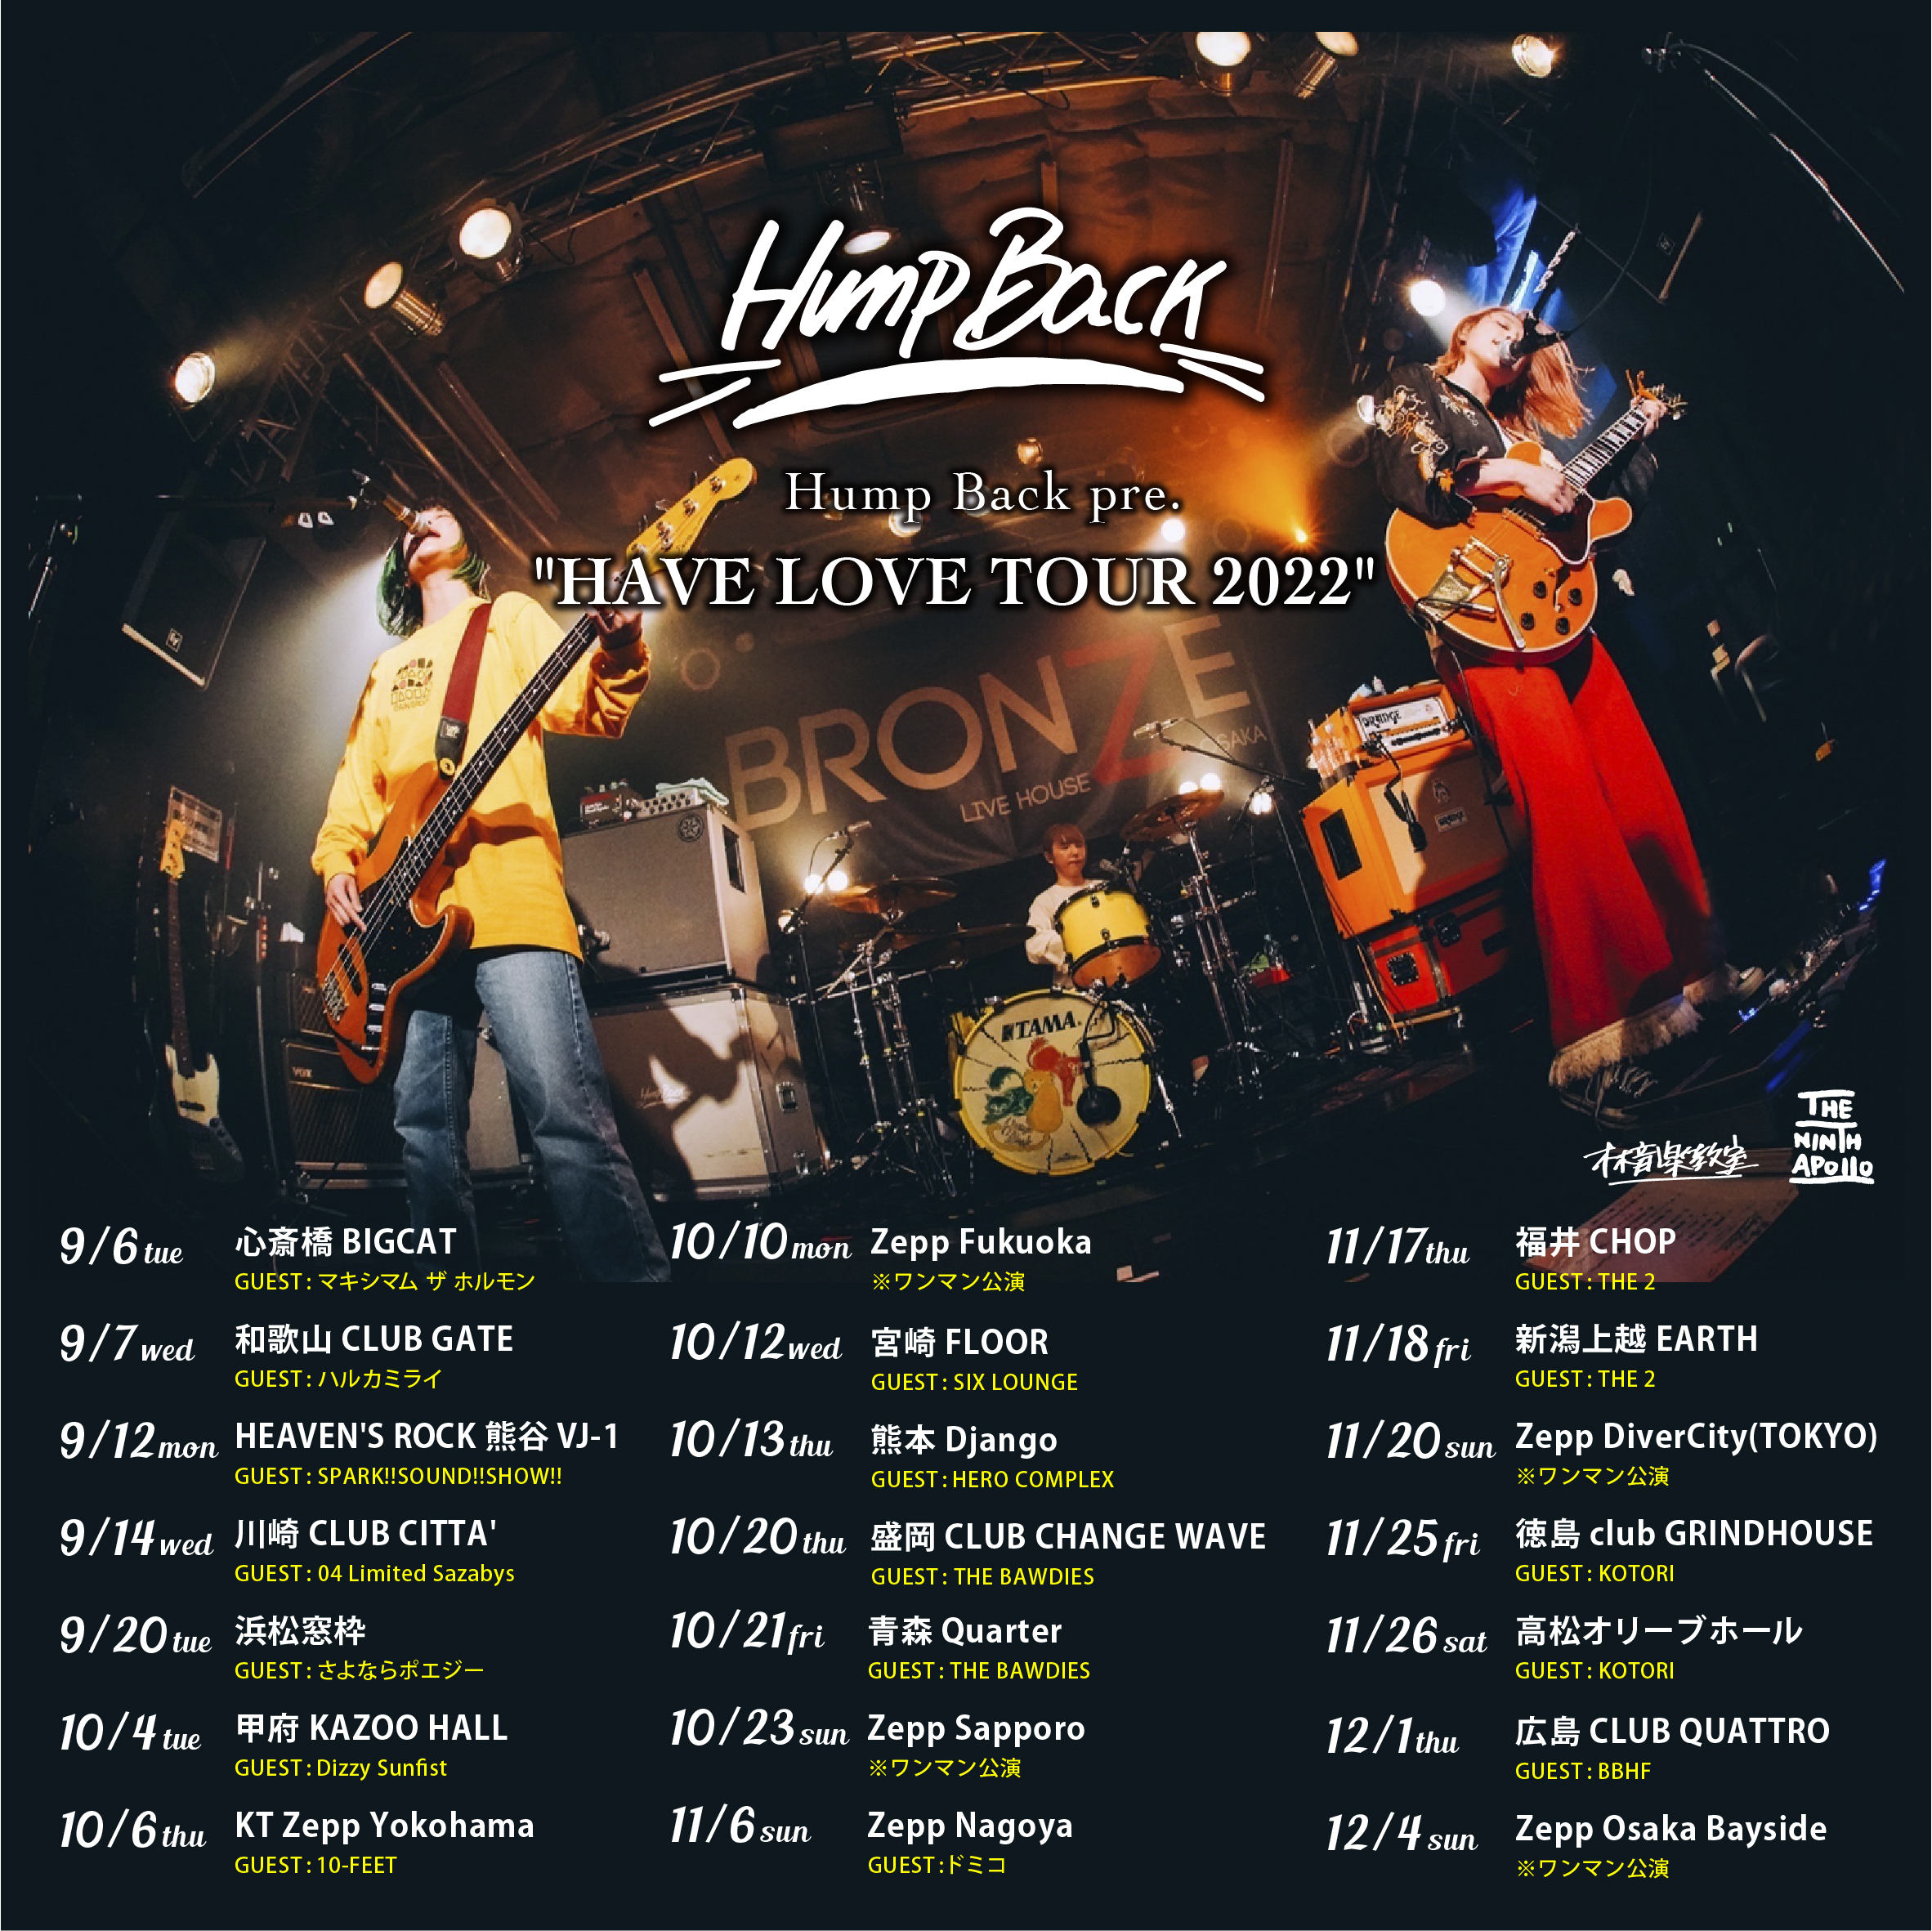 Hump Back "HAVE LOVE TOUR 2022" 出演決定！